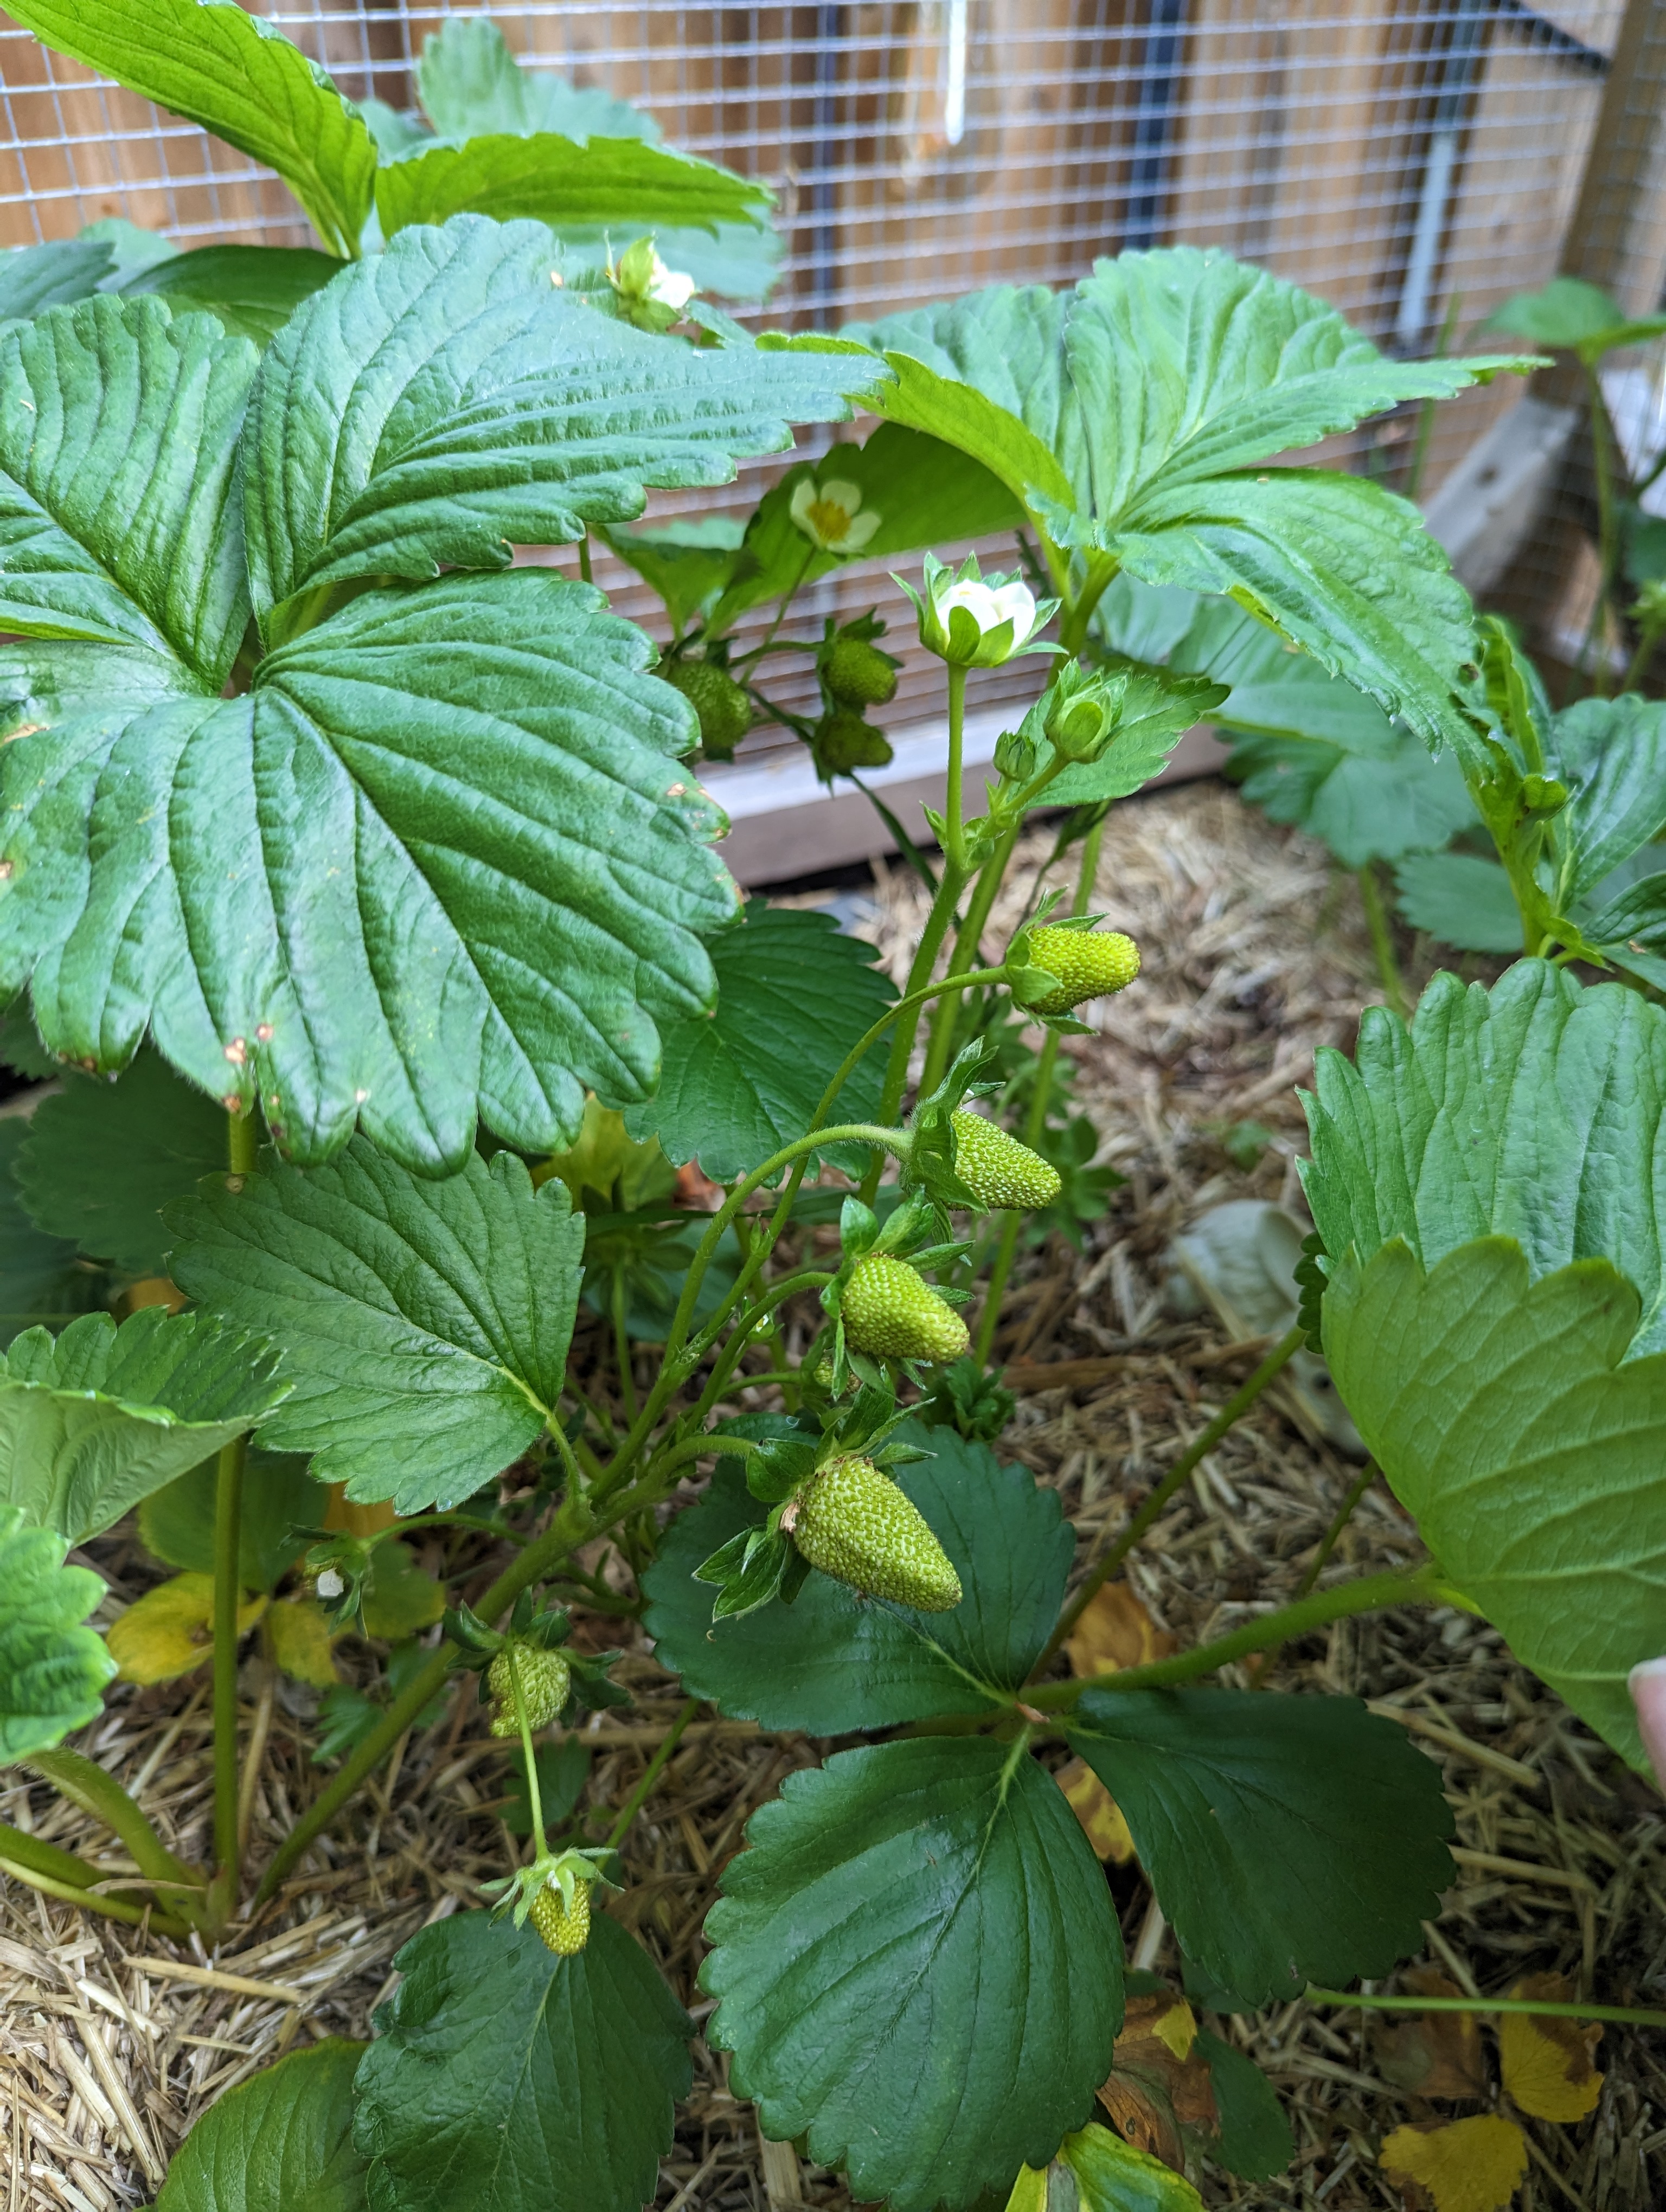 strawberry plants with hwhite flowers in bloom and some green unripened berries